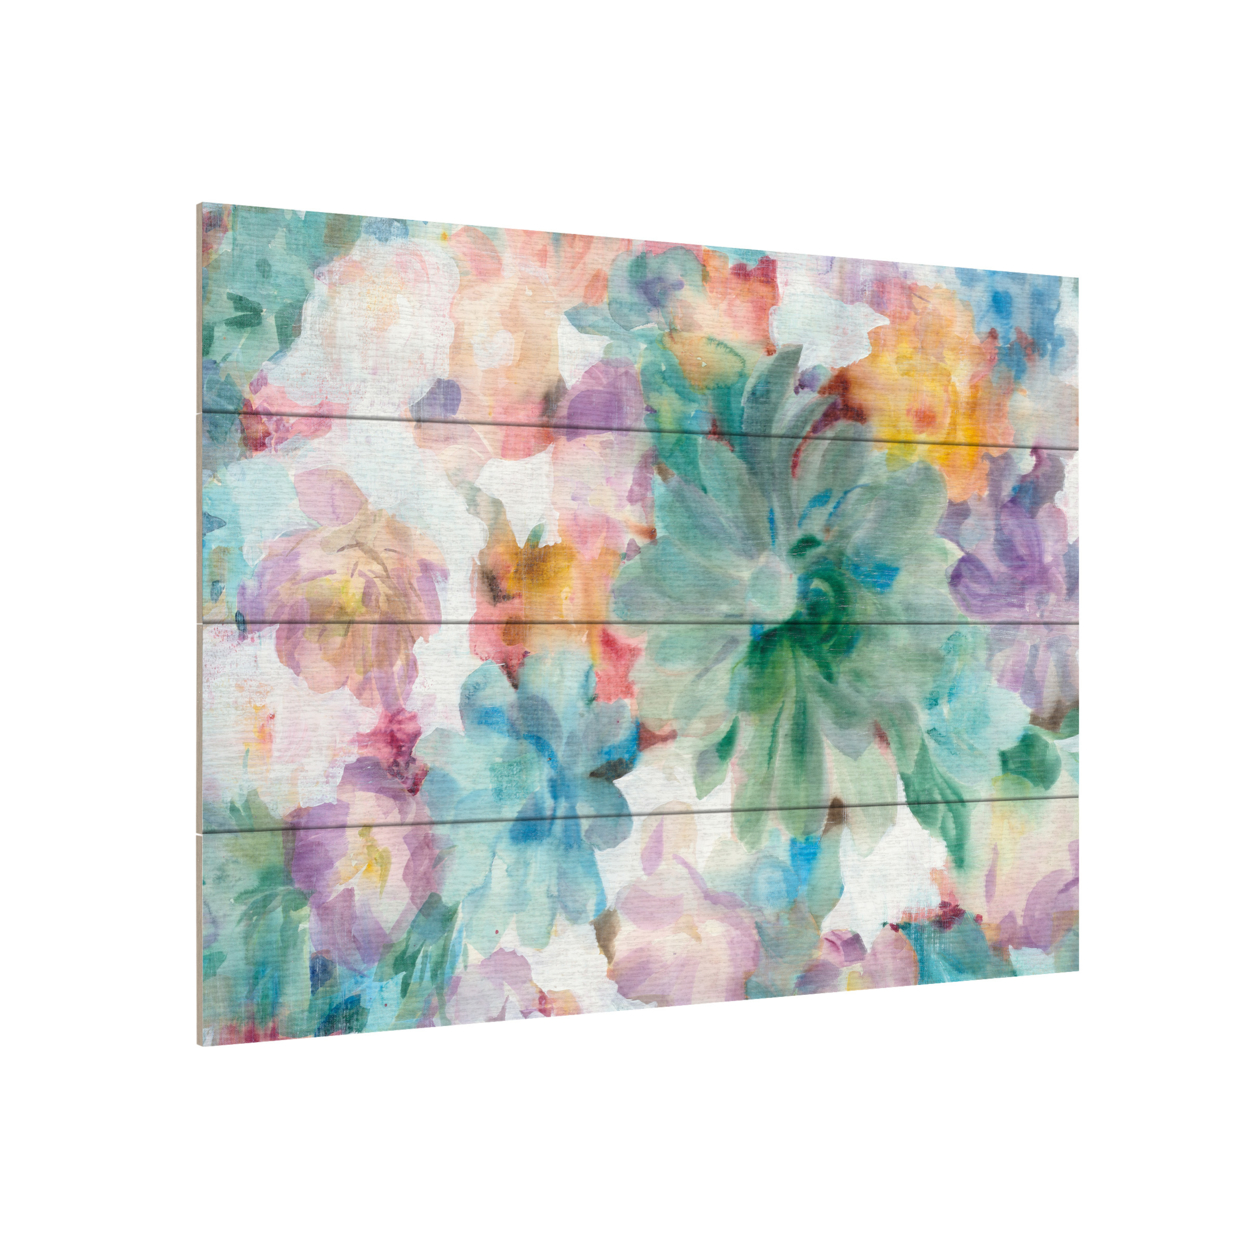 Wall Art 12 X 16 Inches Titled Succulent Florals Crop Ready To Hang Printed On Wooden Planks